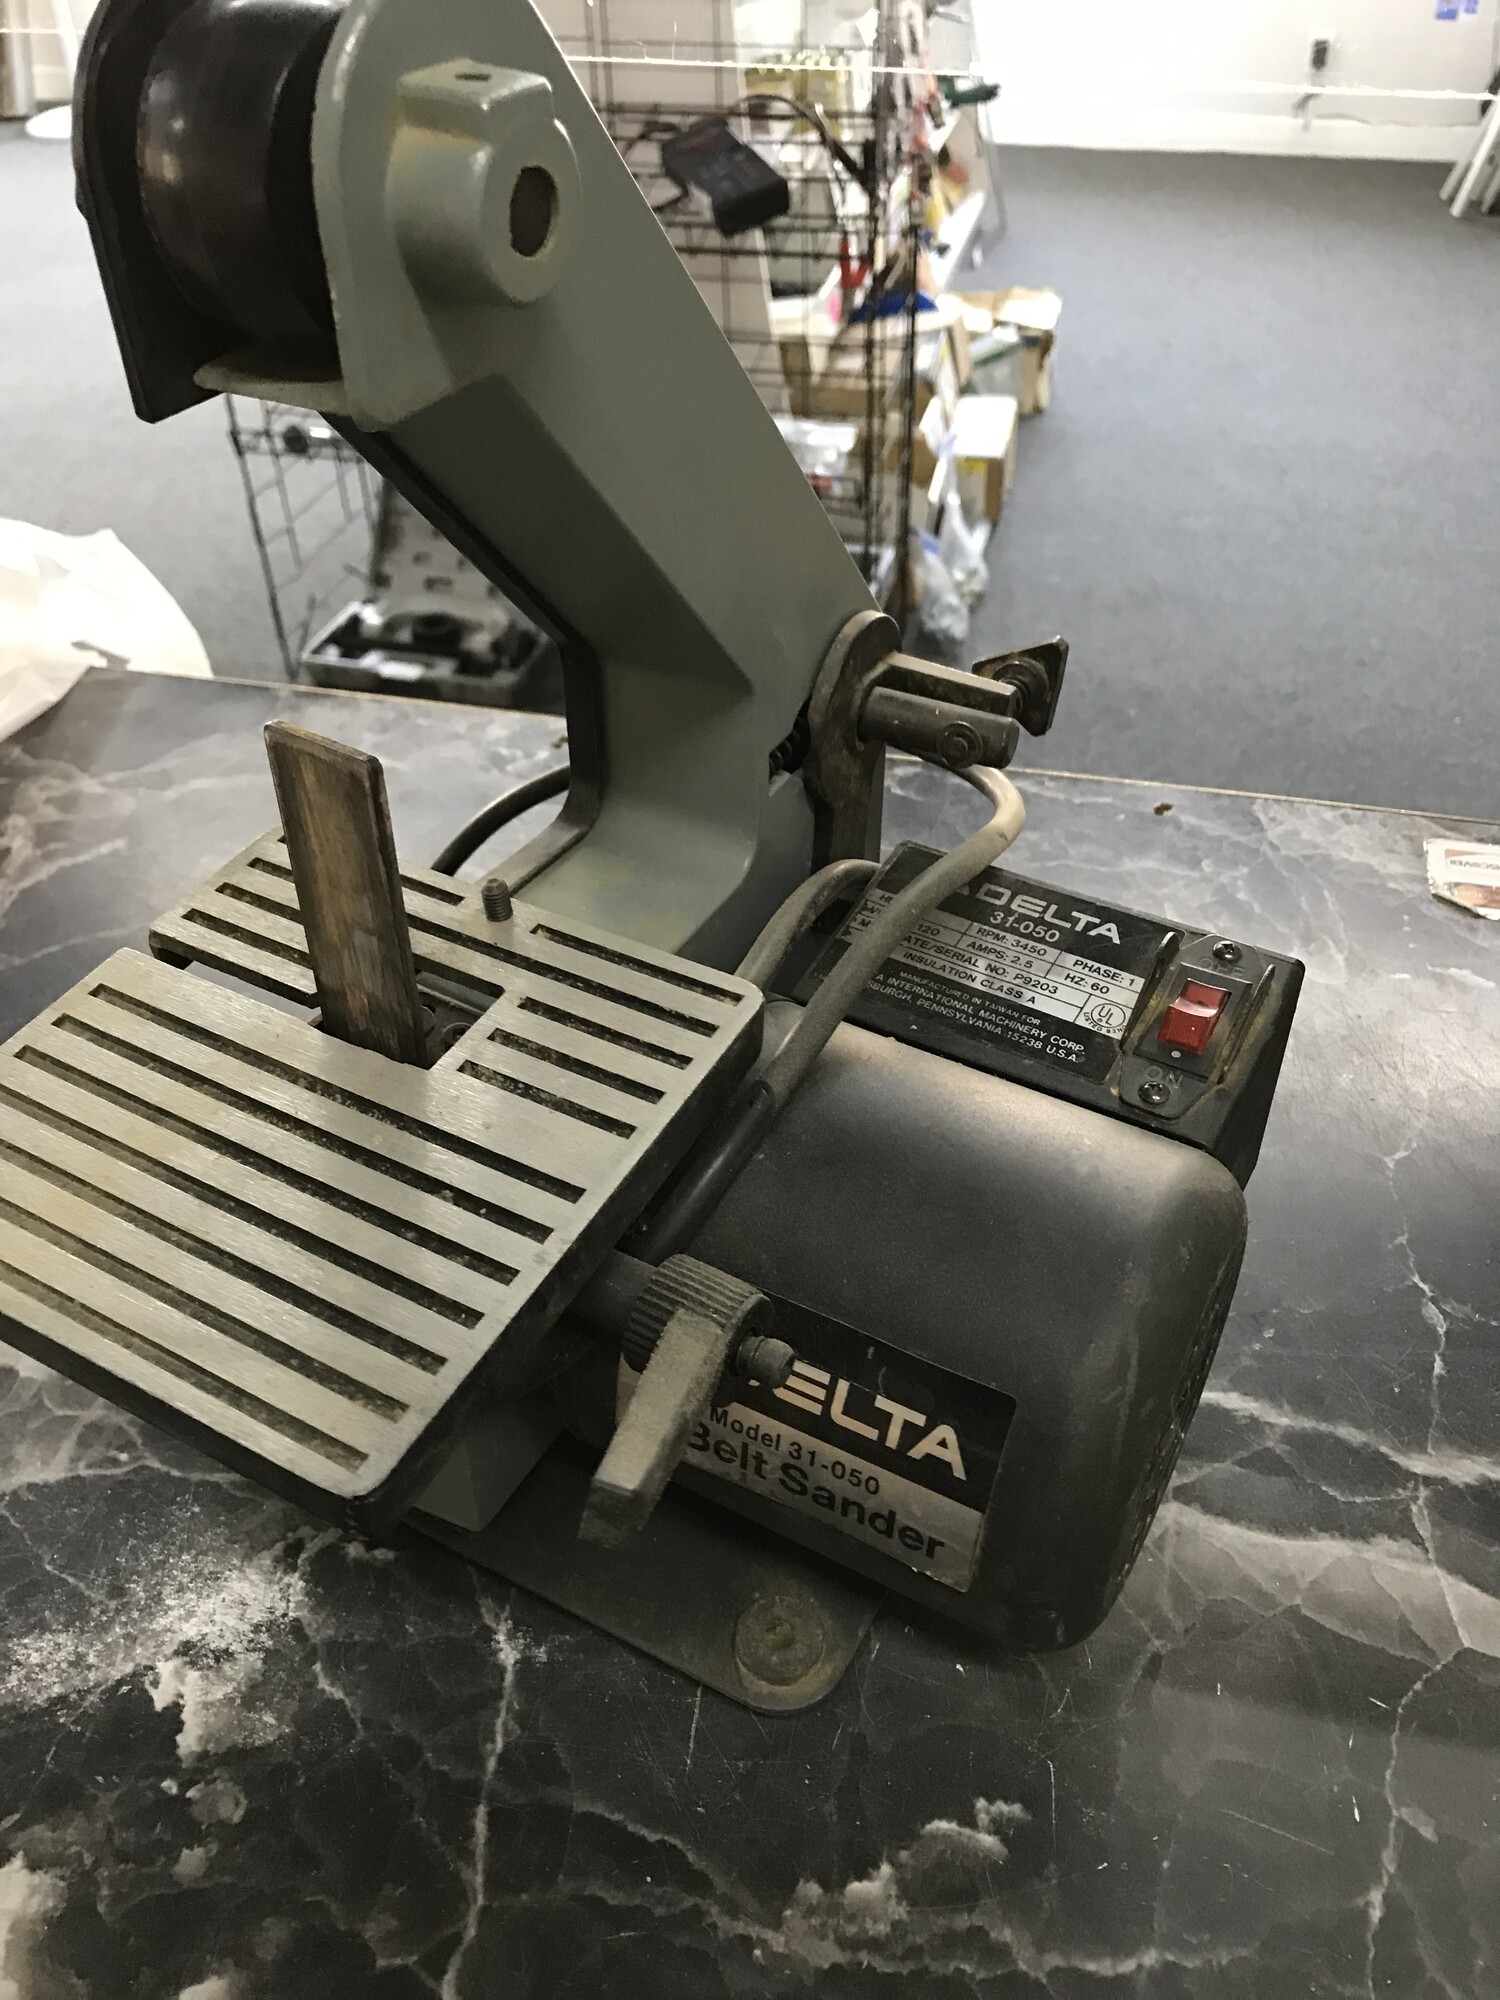 1in Belt Sander, Delta, 31-050

Note:  sander does not come with any belts ( 1in x 30in belt size)